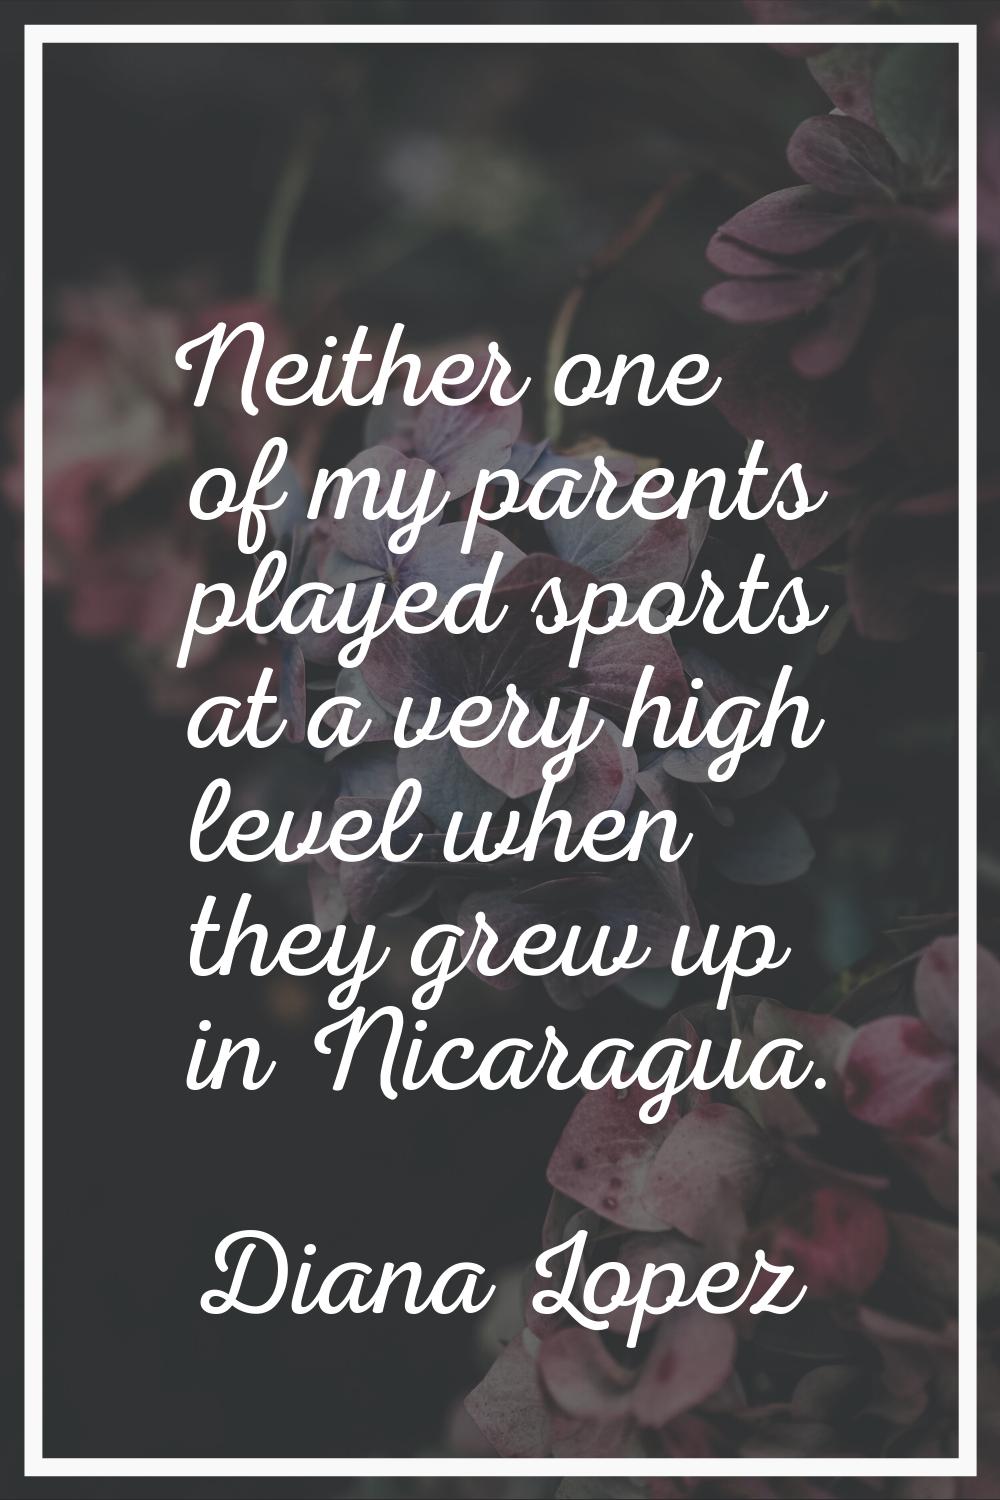 Neither one of my parents played sports at a very high level when they grew up in Nicaragua.